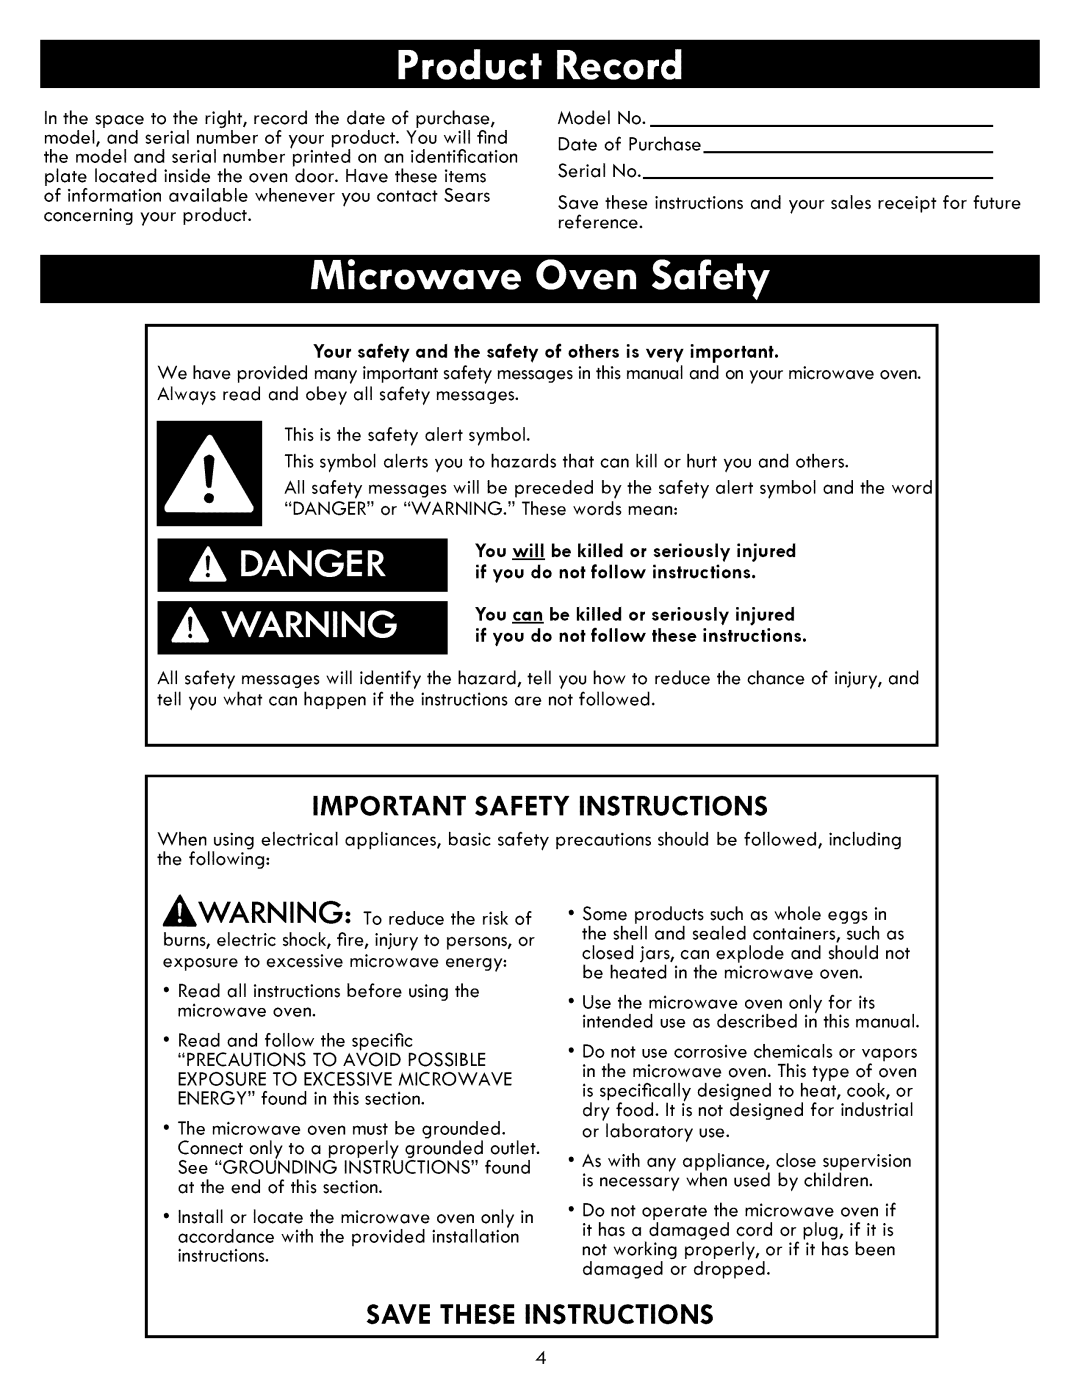 Kenmore 721.86002, 721.86009, 721.86003 manual Important Safety Instructions, Save These Instructions 